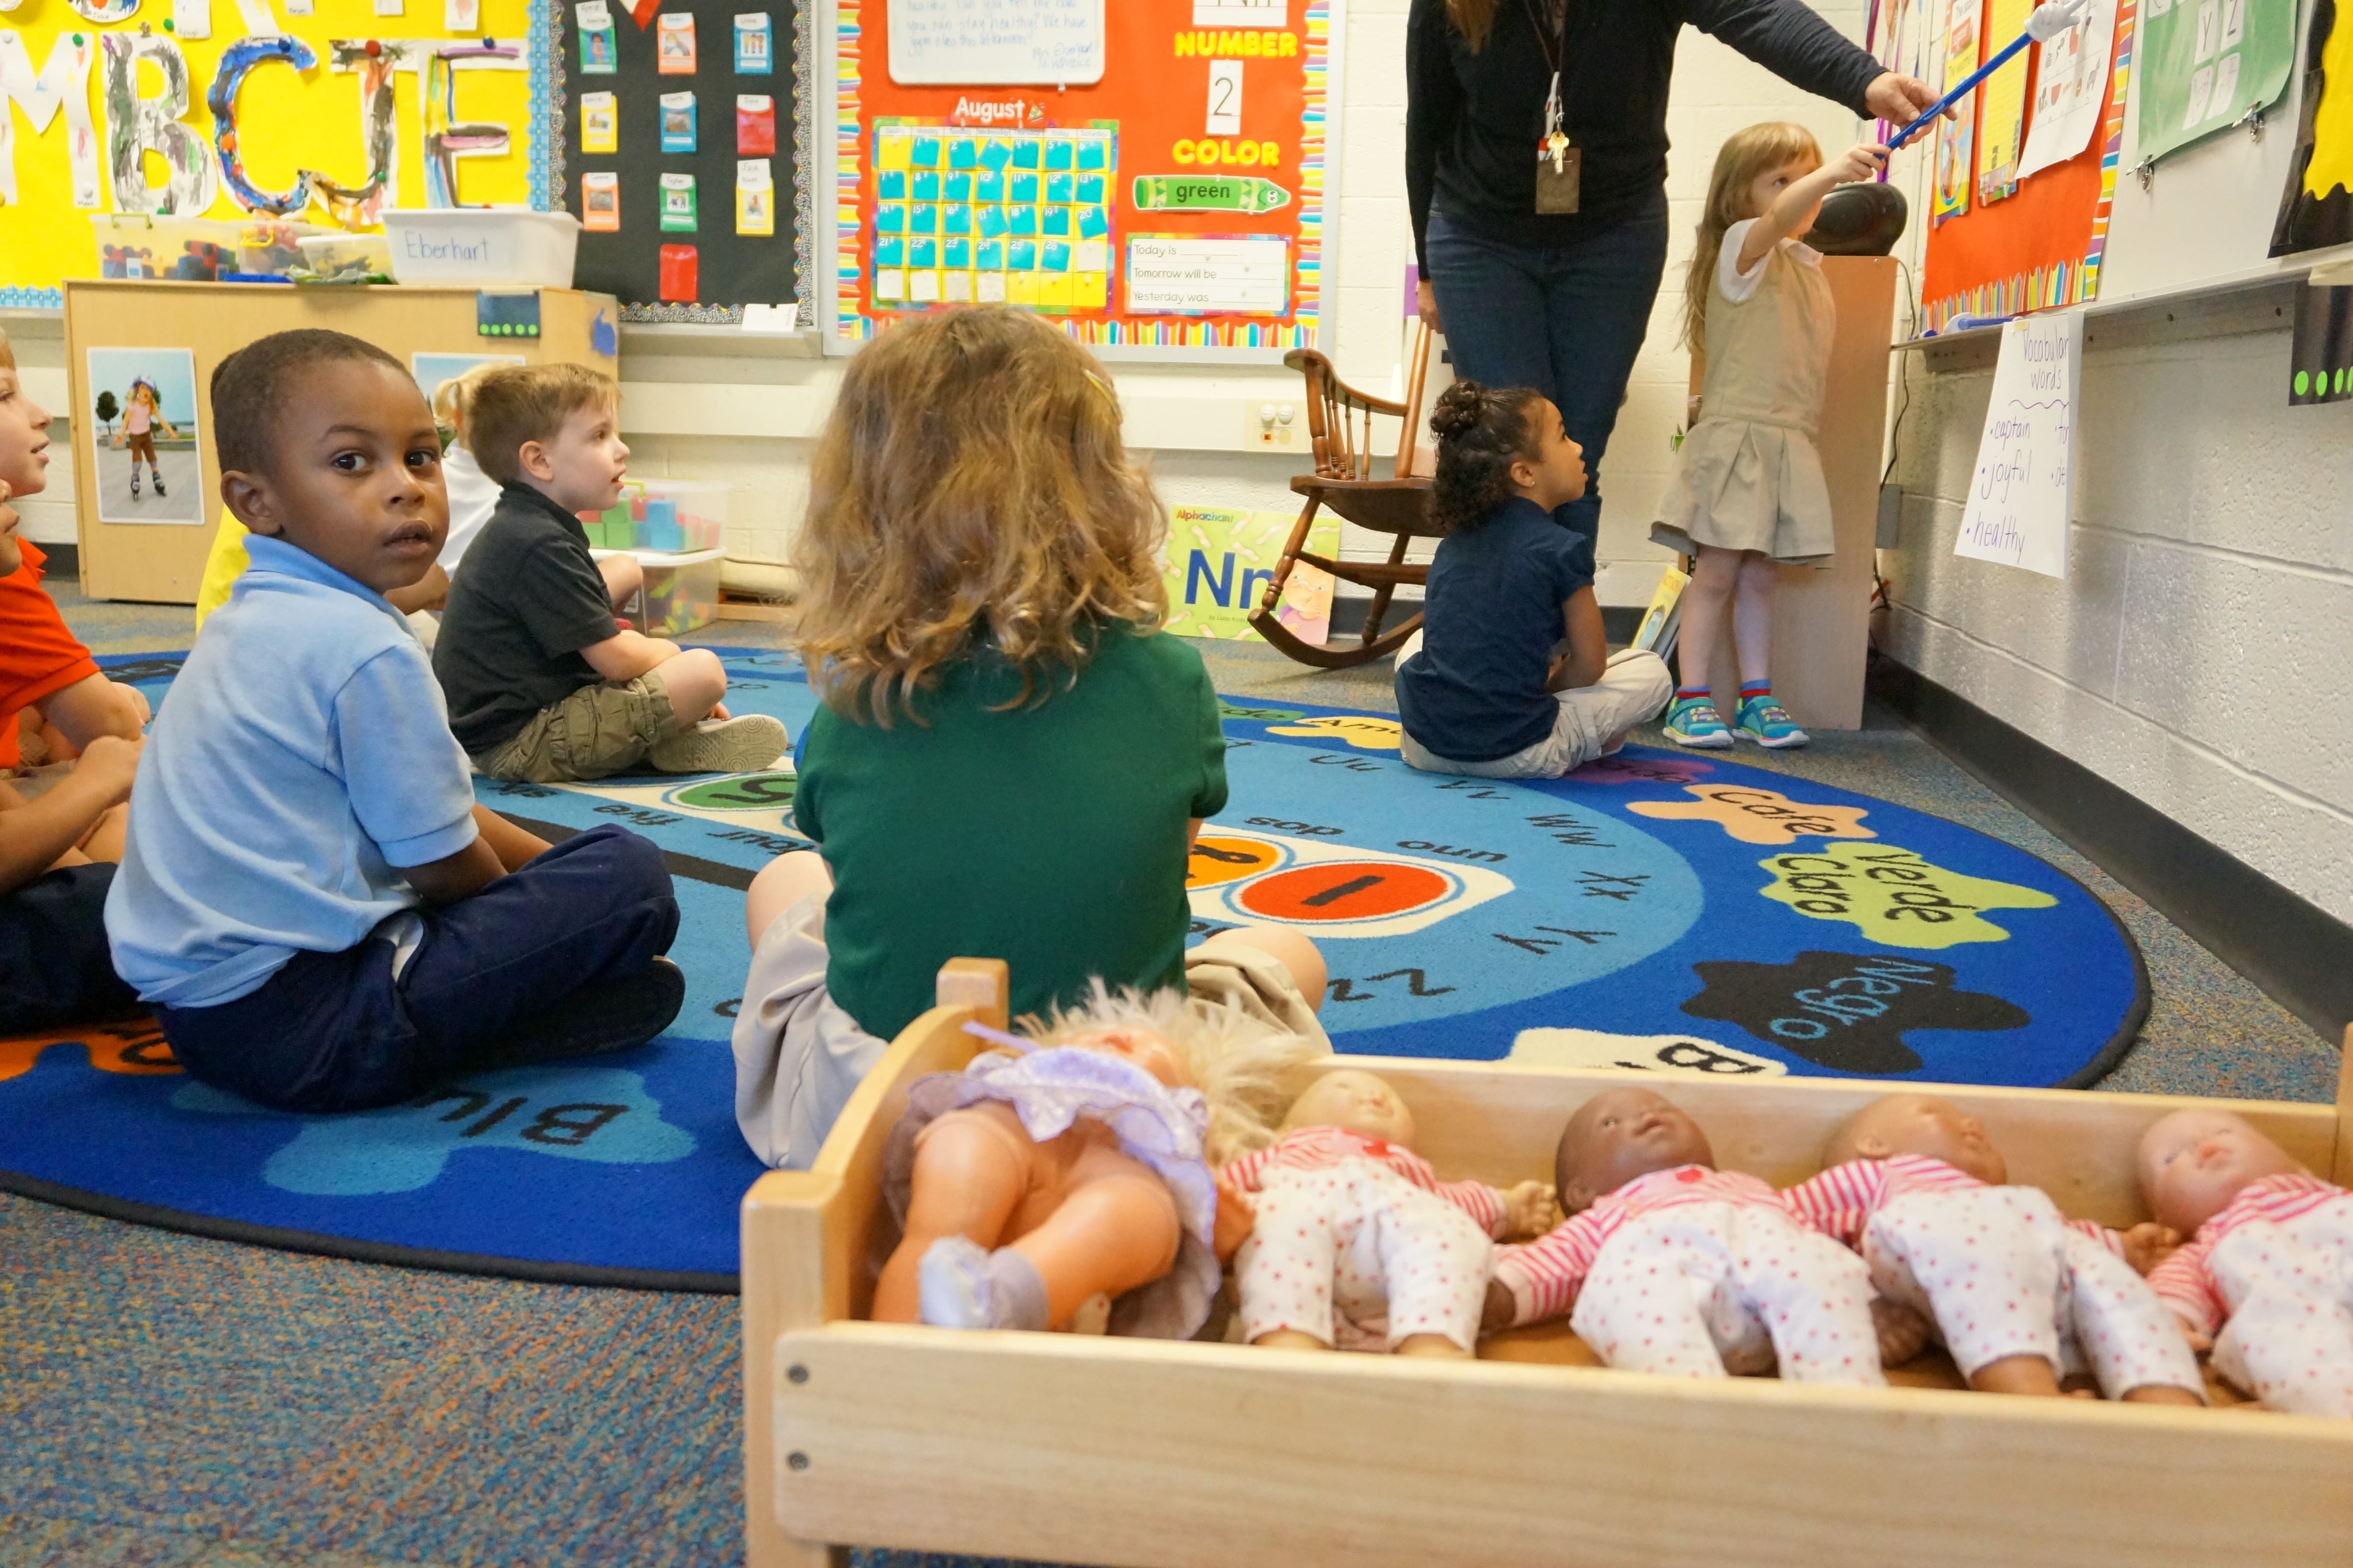 A group of six preschoolers participate in an exercise while a boy in a blue shirt looks back at the photographer. There is a row of dolls sitting in a wooden bin in the foreground.